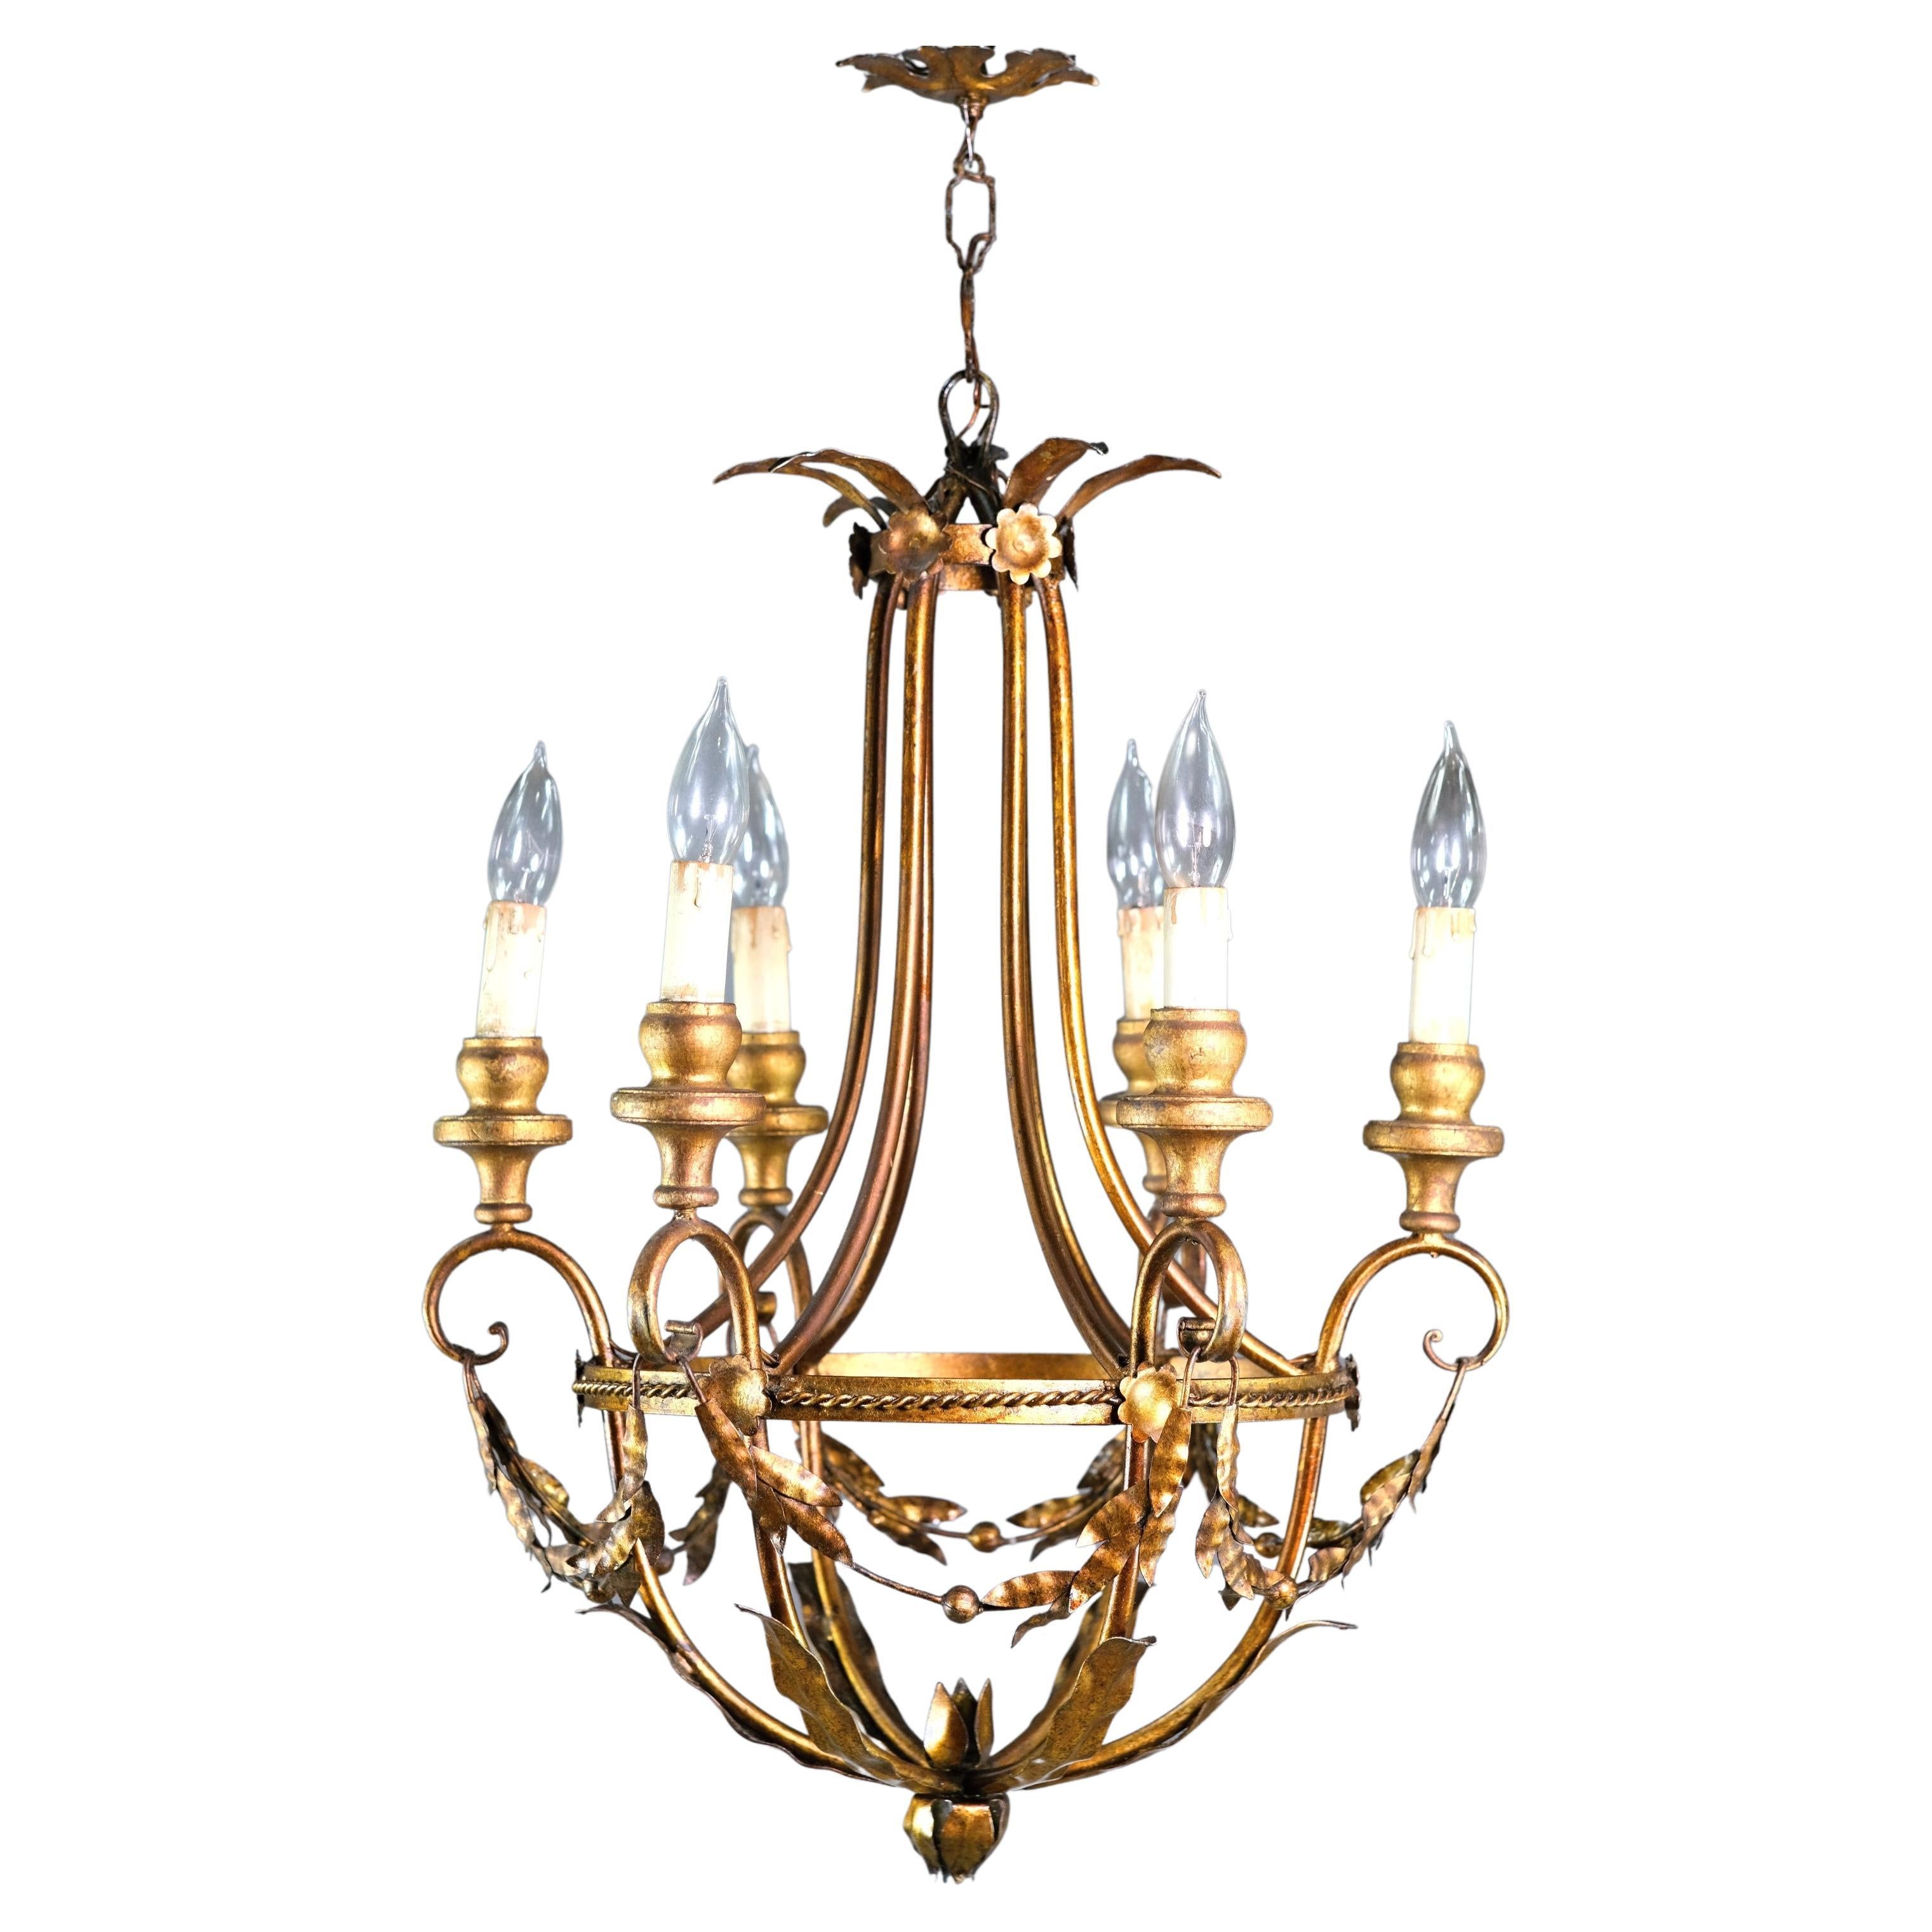 20th century chandelier from Italy. Made from gold gilt steel and wood. Features 6 arms and dripping with crystals. Floral, foliate design accents. This can be seen at our 400 Gilligan St location in Scranton, PA.